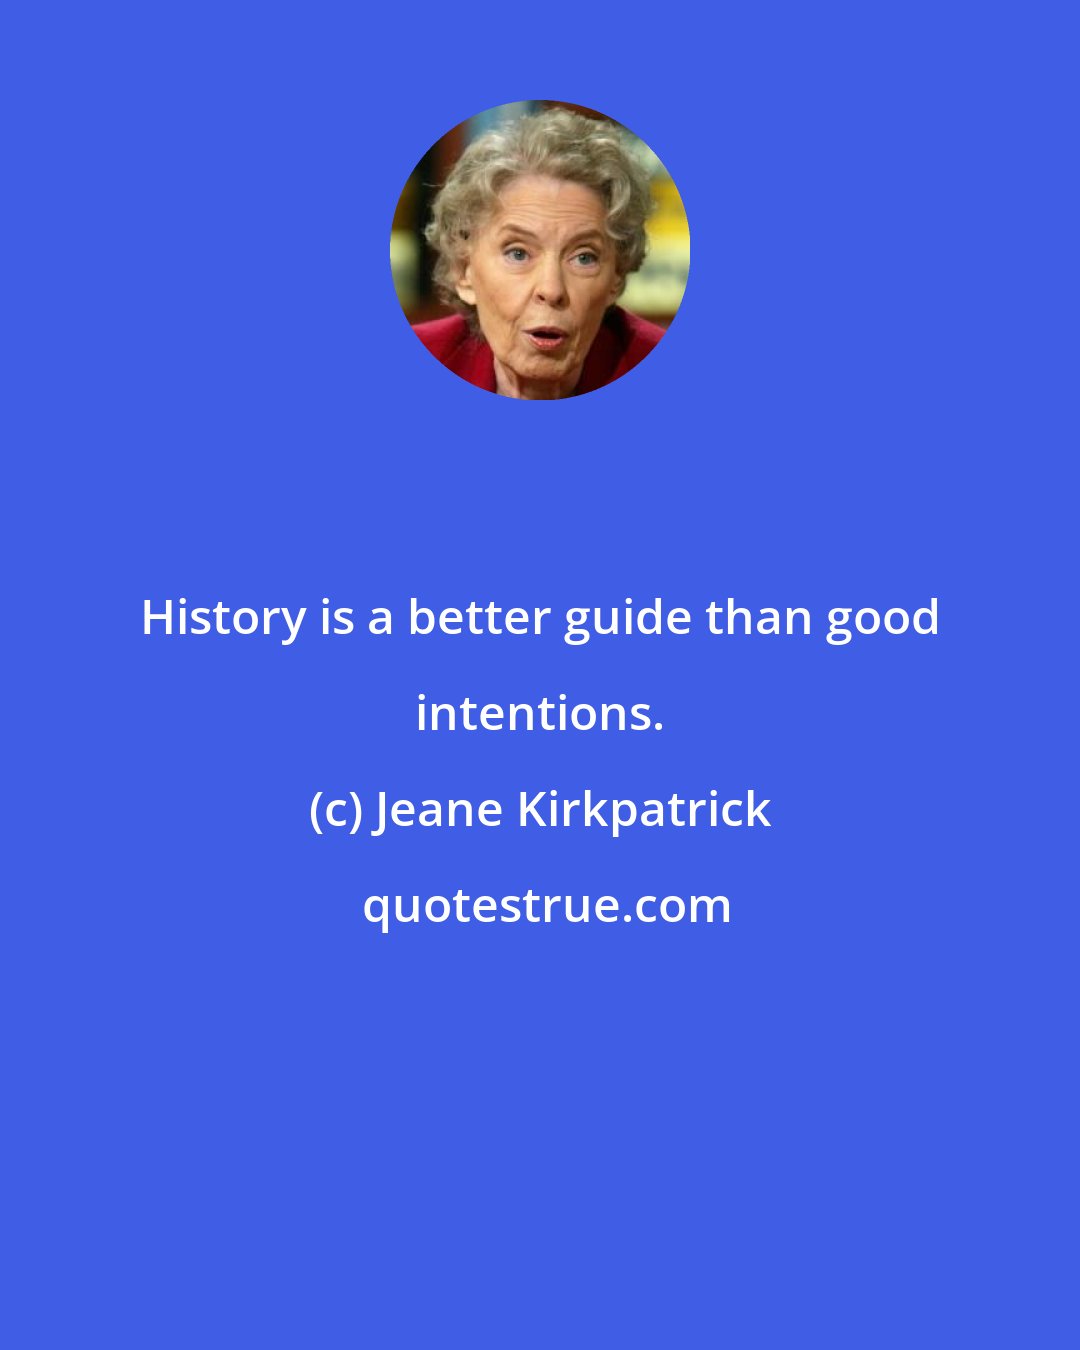 Jeane Kirkpatrick: History is a better guide than good intentions.